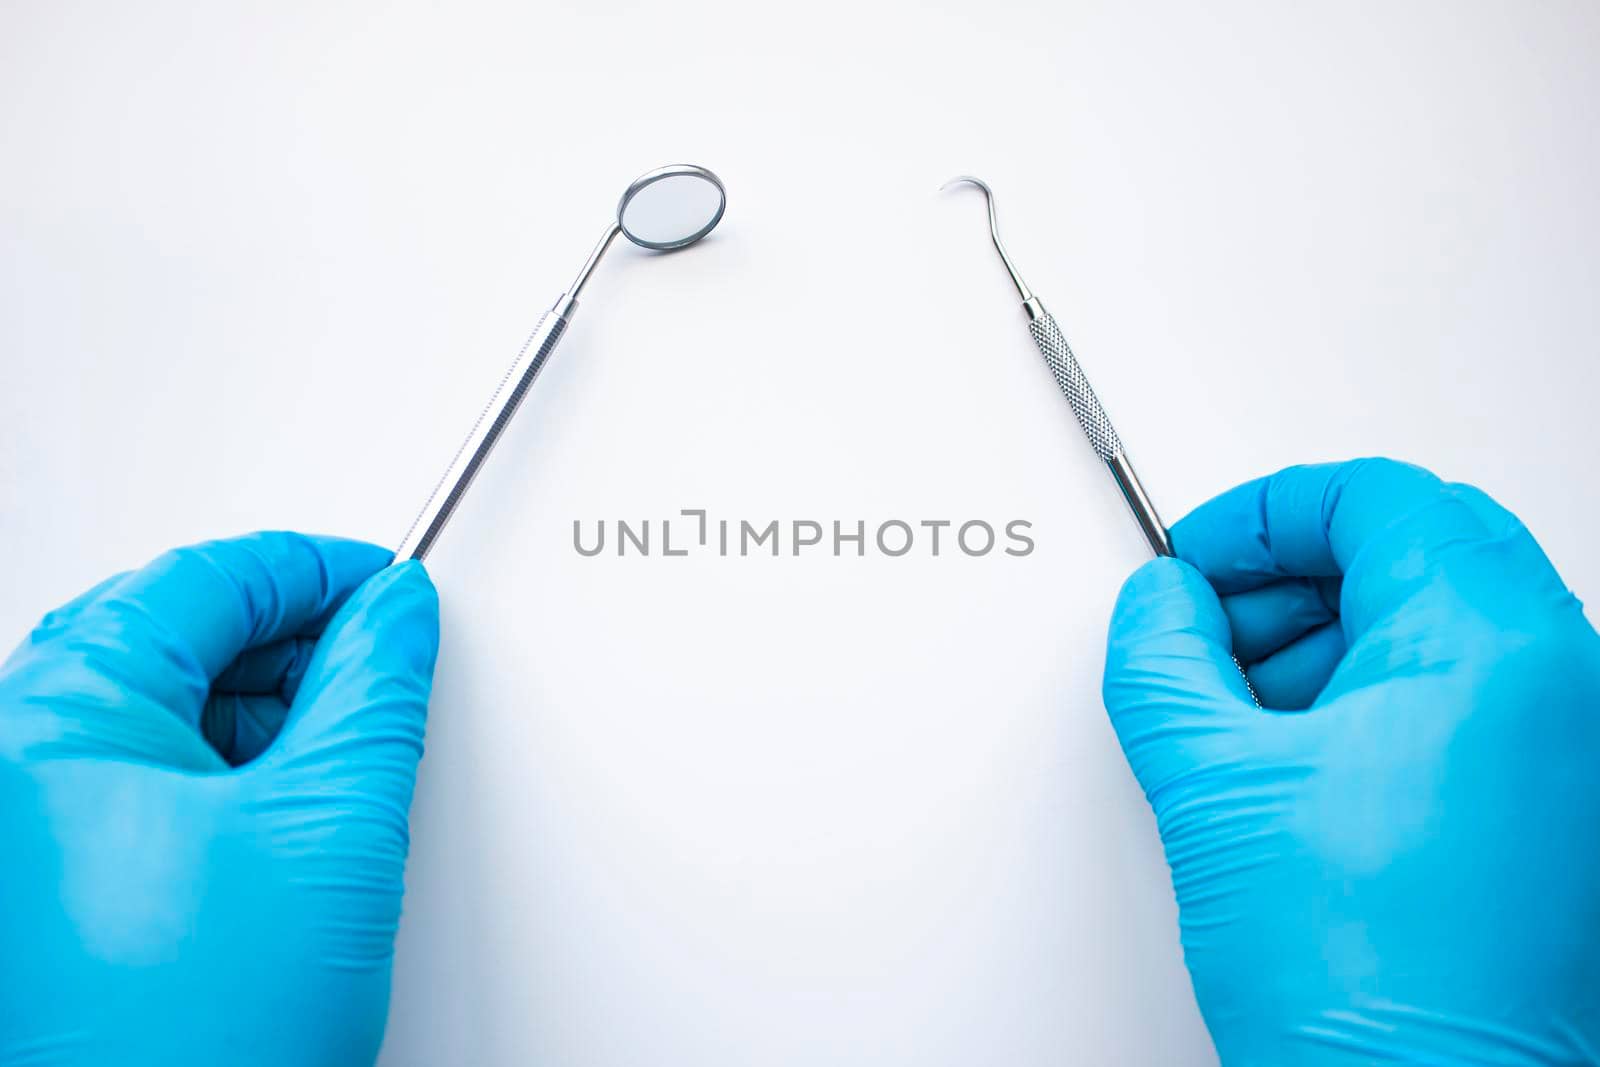 Dentist mirror and probe in hands isolated on white. Professional Dental Hygiene cleaning tools. Calculus and Plaque Remover Set, Dental Scaler And Mouth Mirror Instruments Hygienist tools.